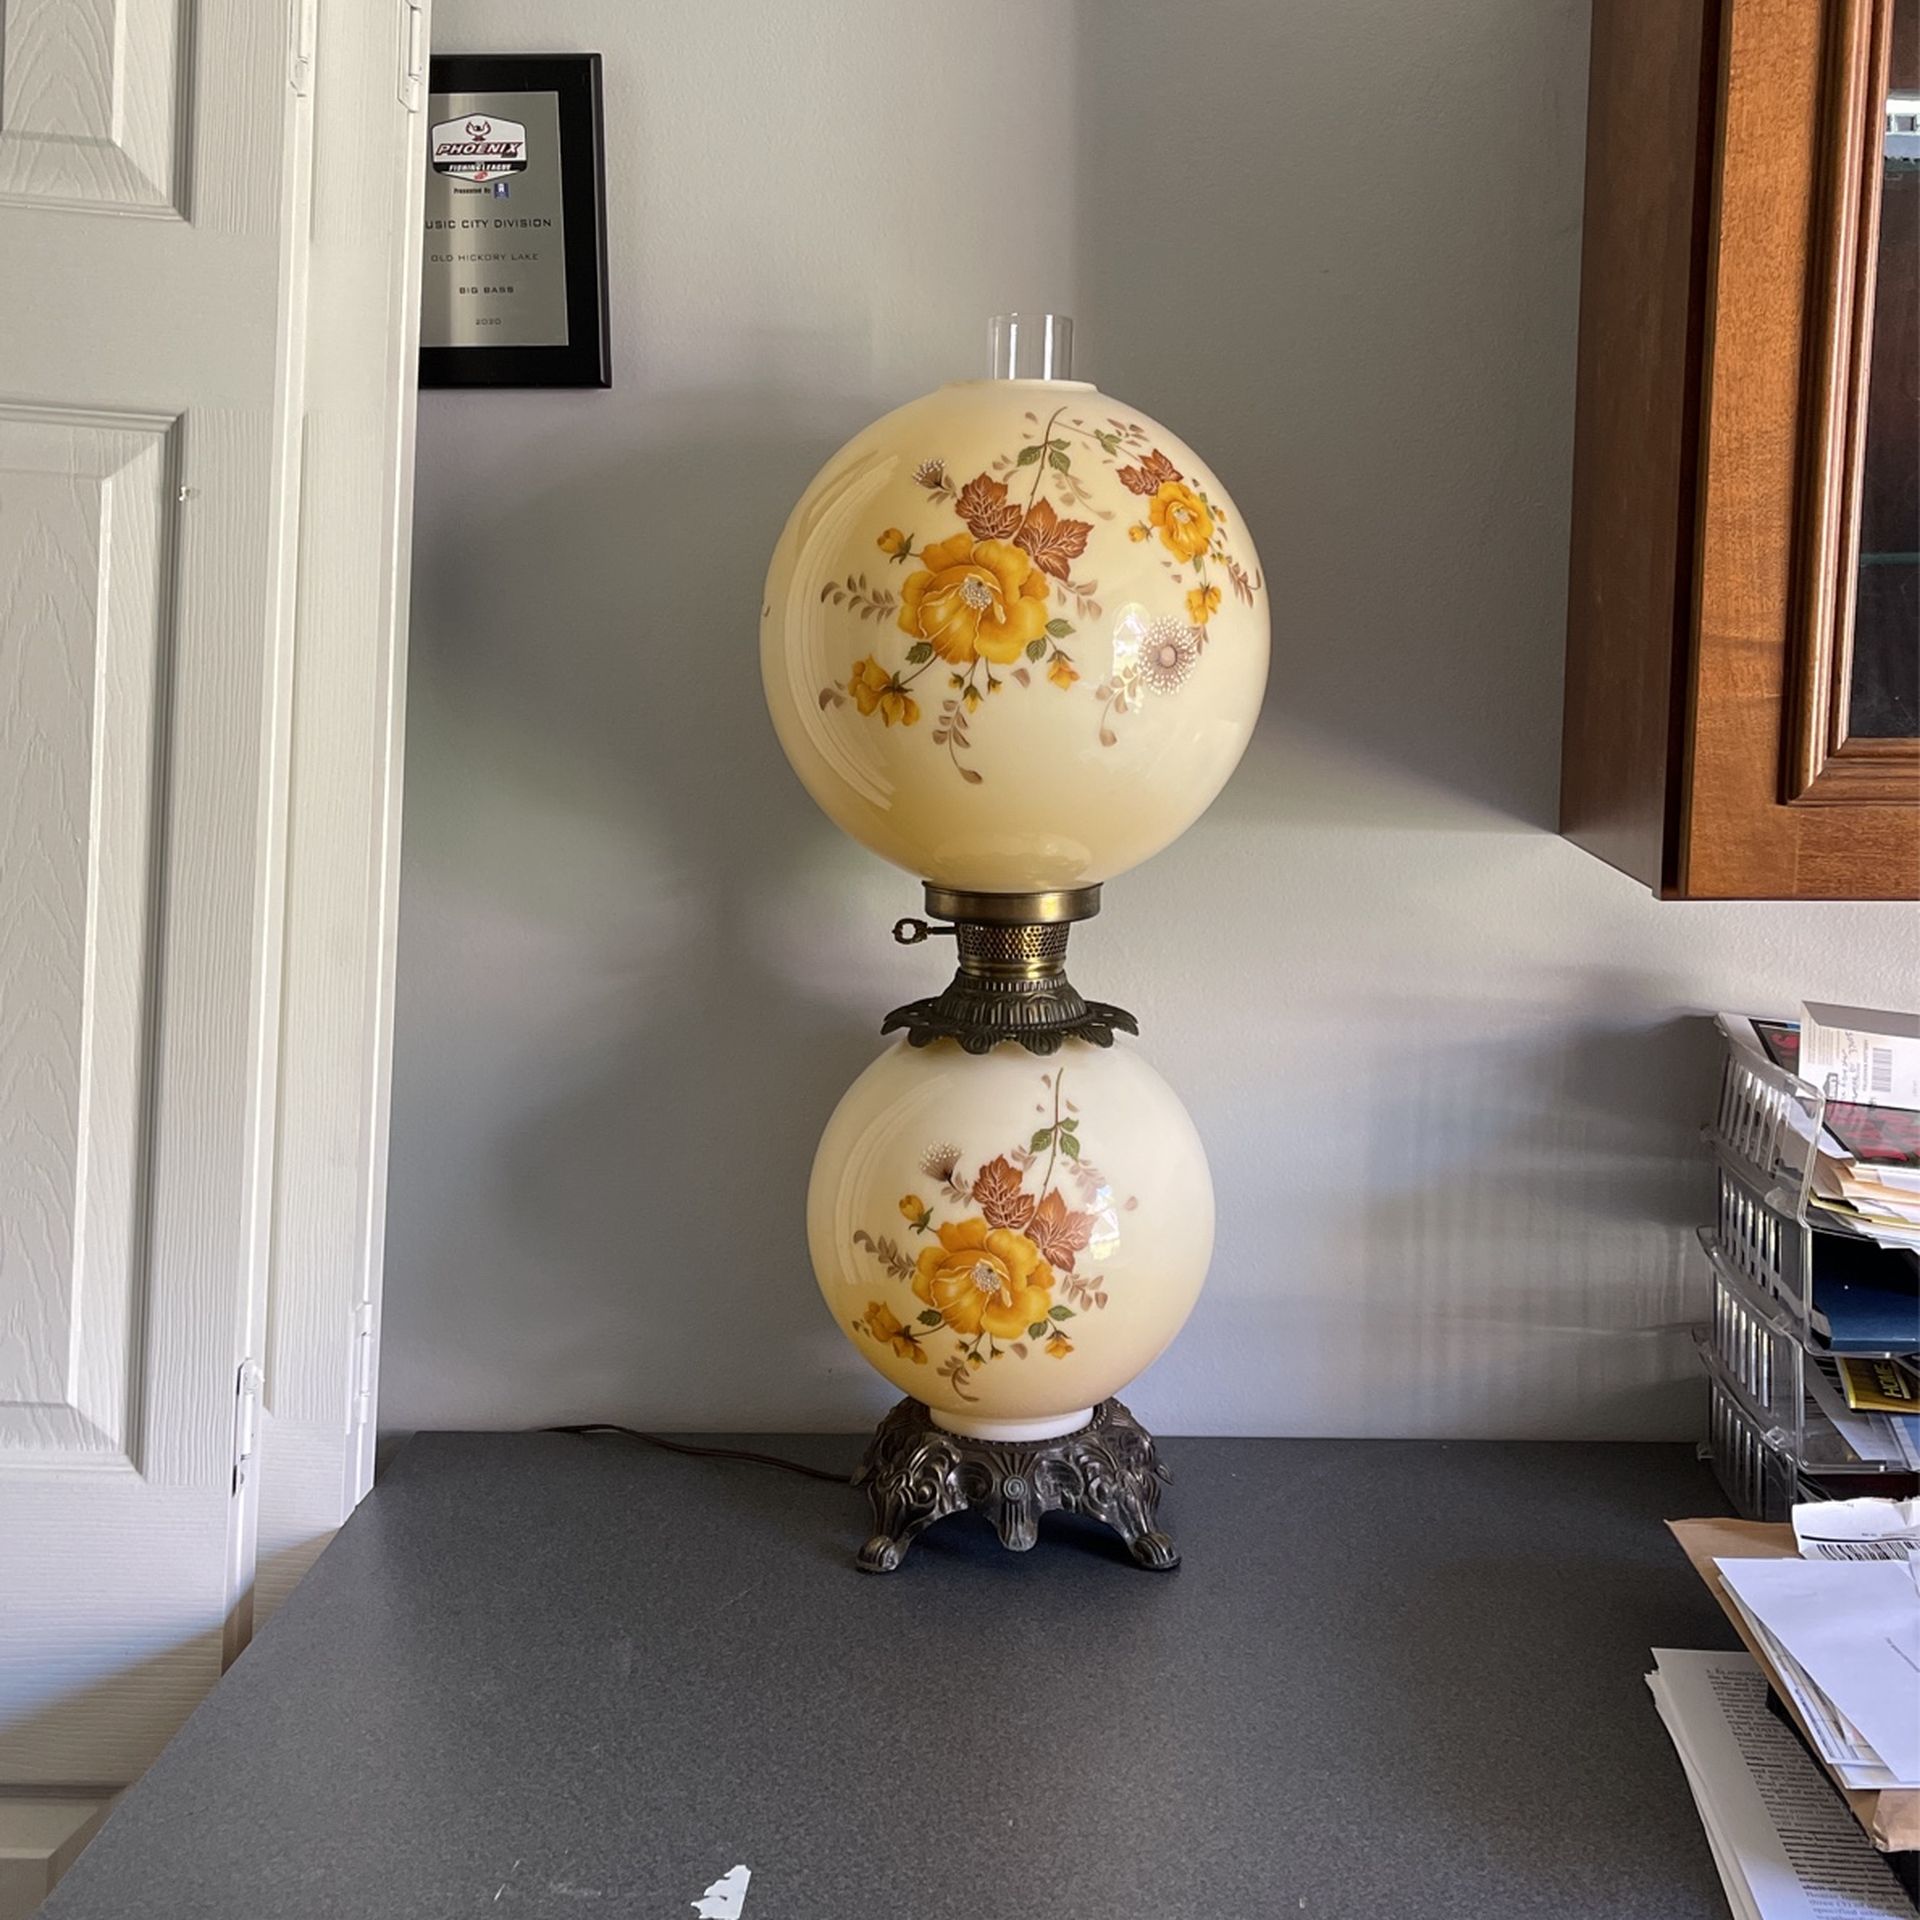 Vintage Double Globe 3 Way Gone With The Wind Parlor Lamp